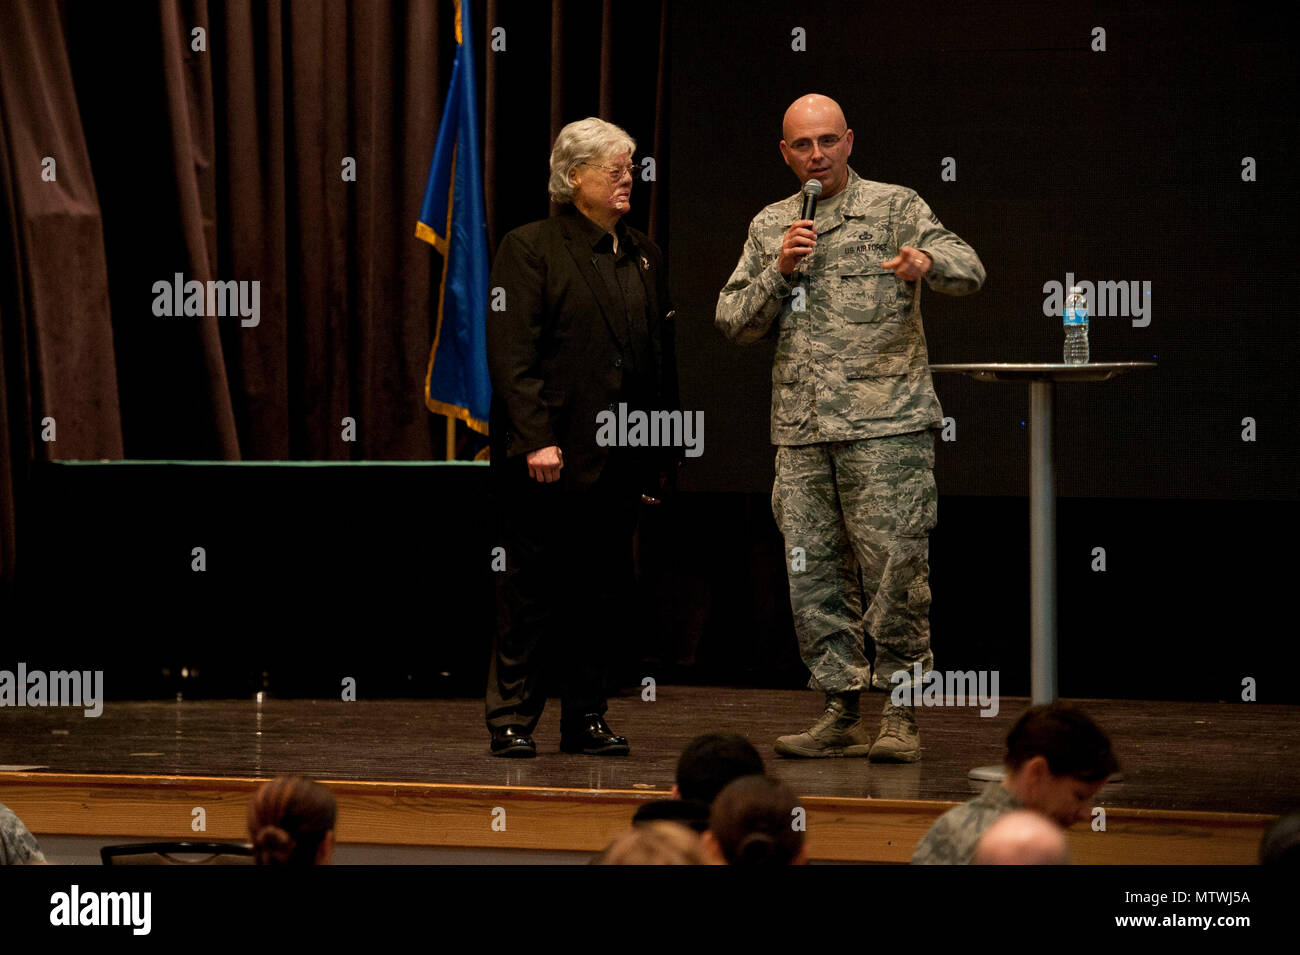 U.S. Air Force Chief Master Sgt. Alexander Del Valle, 51st Fighter Wing command chief, thanks Dave Roever, a Vietnam War veteran, for speaking about resiliency at Osan Air Base, Republic of Korea, Jan. 25, 2017. Roever, is an inspirational speaker who shares his story about how he survived after suffering burns all over his body when a phosphorus grenade exploded in his hand during the war. (U.S. Air Force photo by Staff Sgt. Jonathan Steffen) Stock Photo